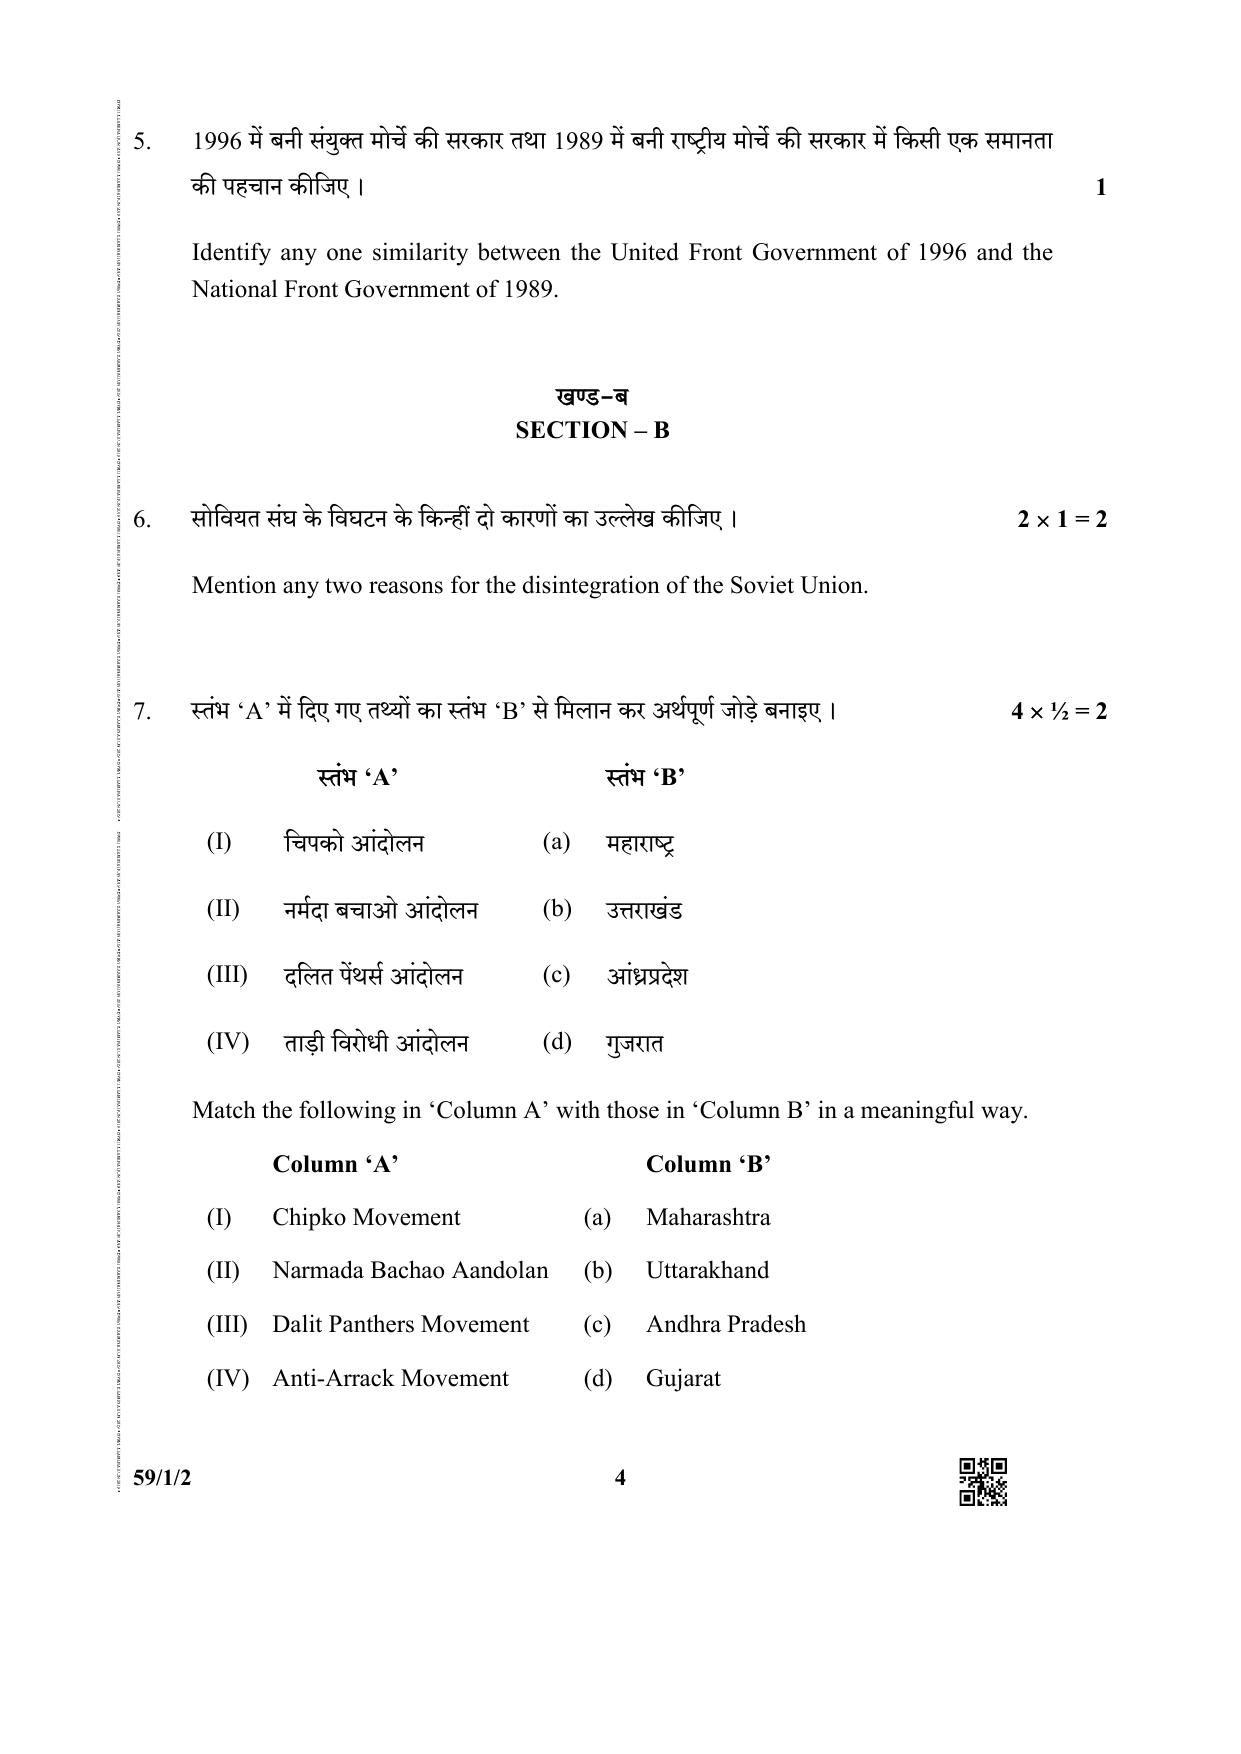 CBSE Class 12 59-1-2 (Political Science) 2019 Question Paper - Page 4